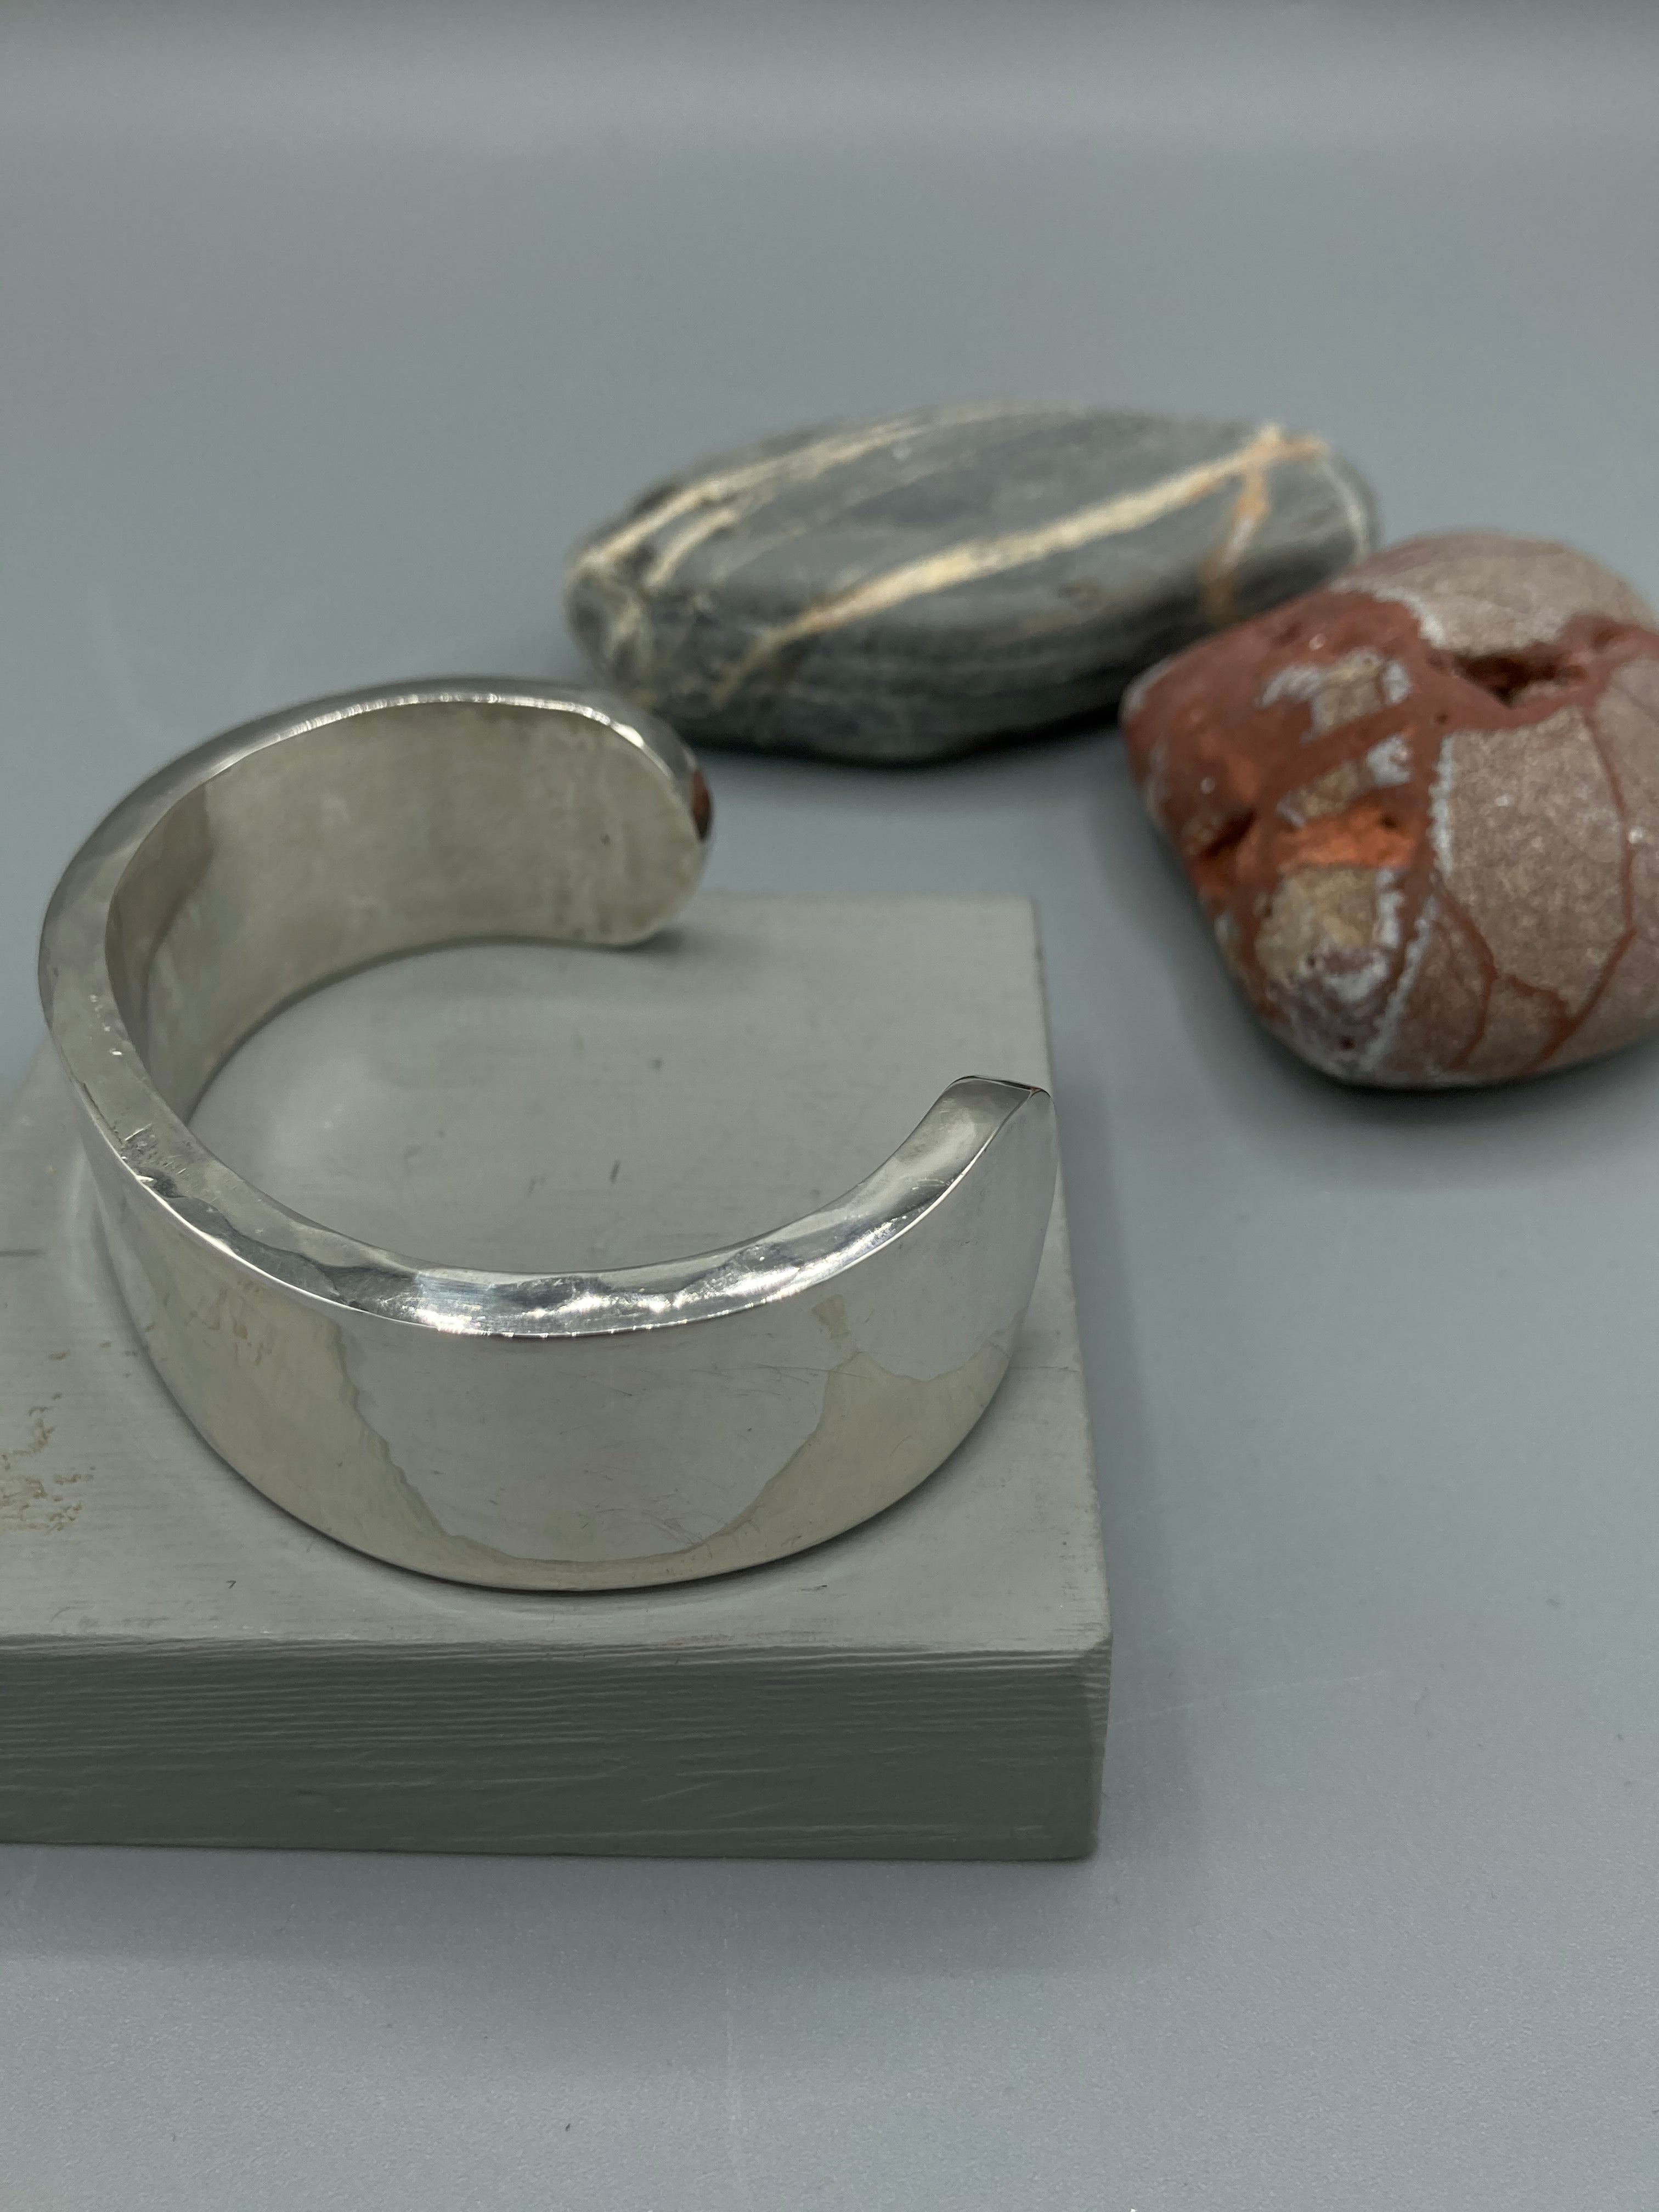 Sterling Silver cuff (Bangle). Hammered, flat finish (Very heavy weight)